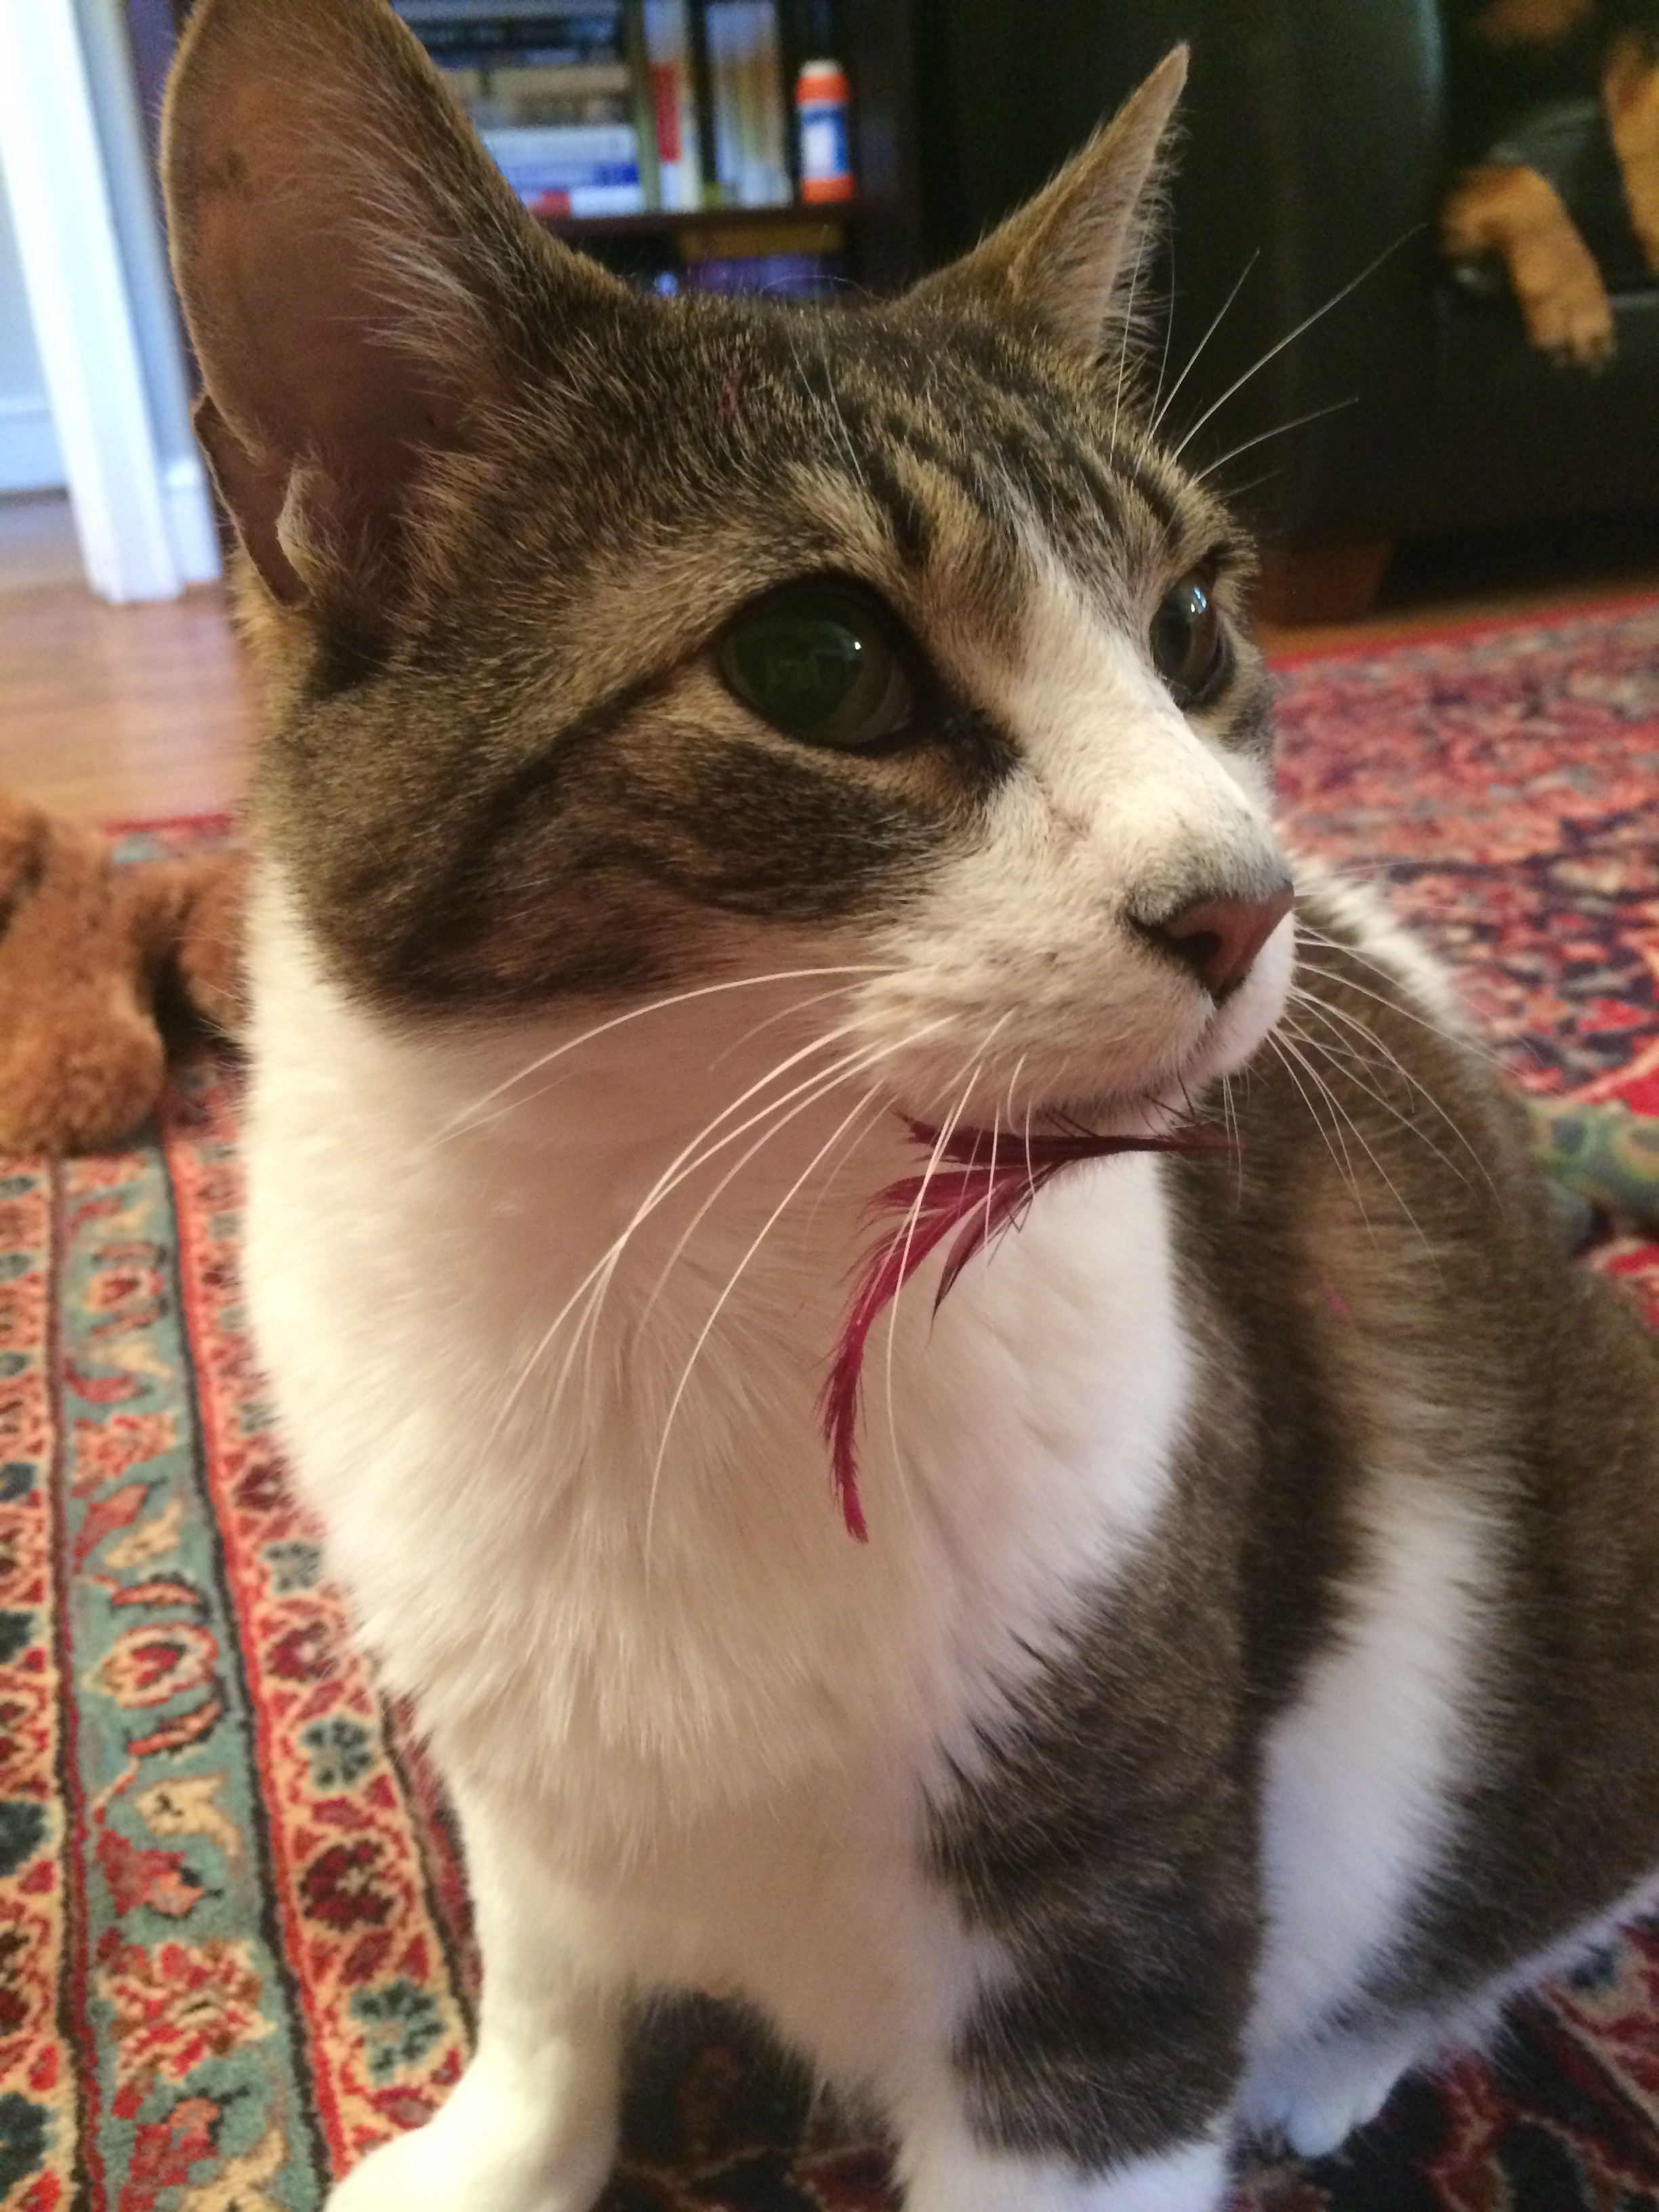 Sam with feather caught on his lip